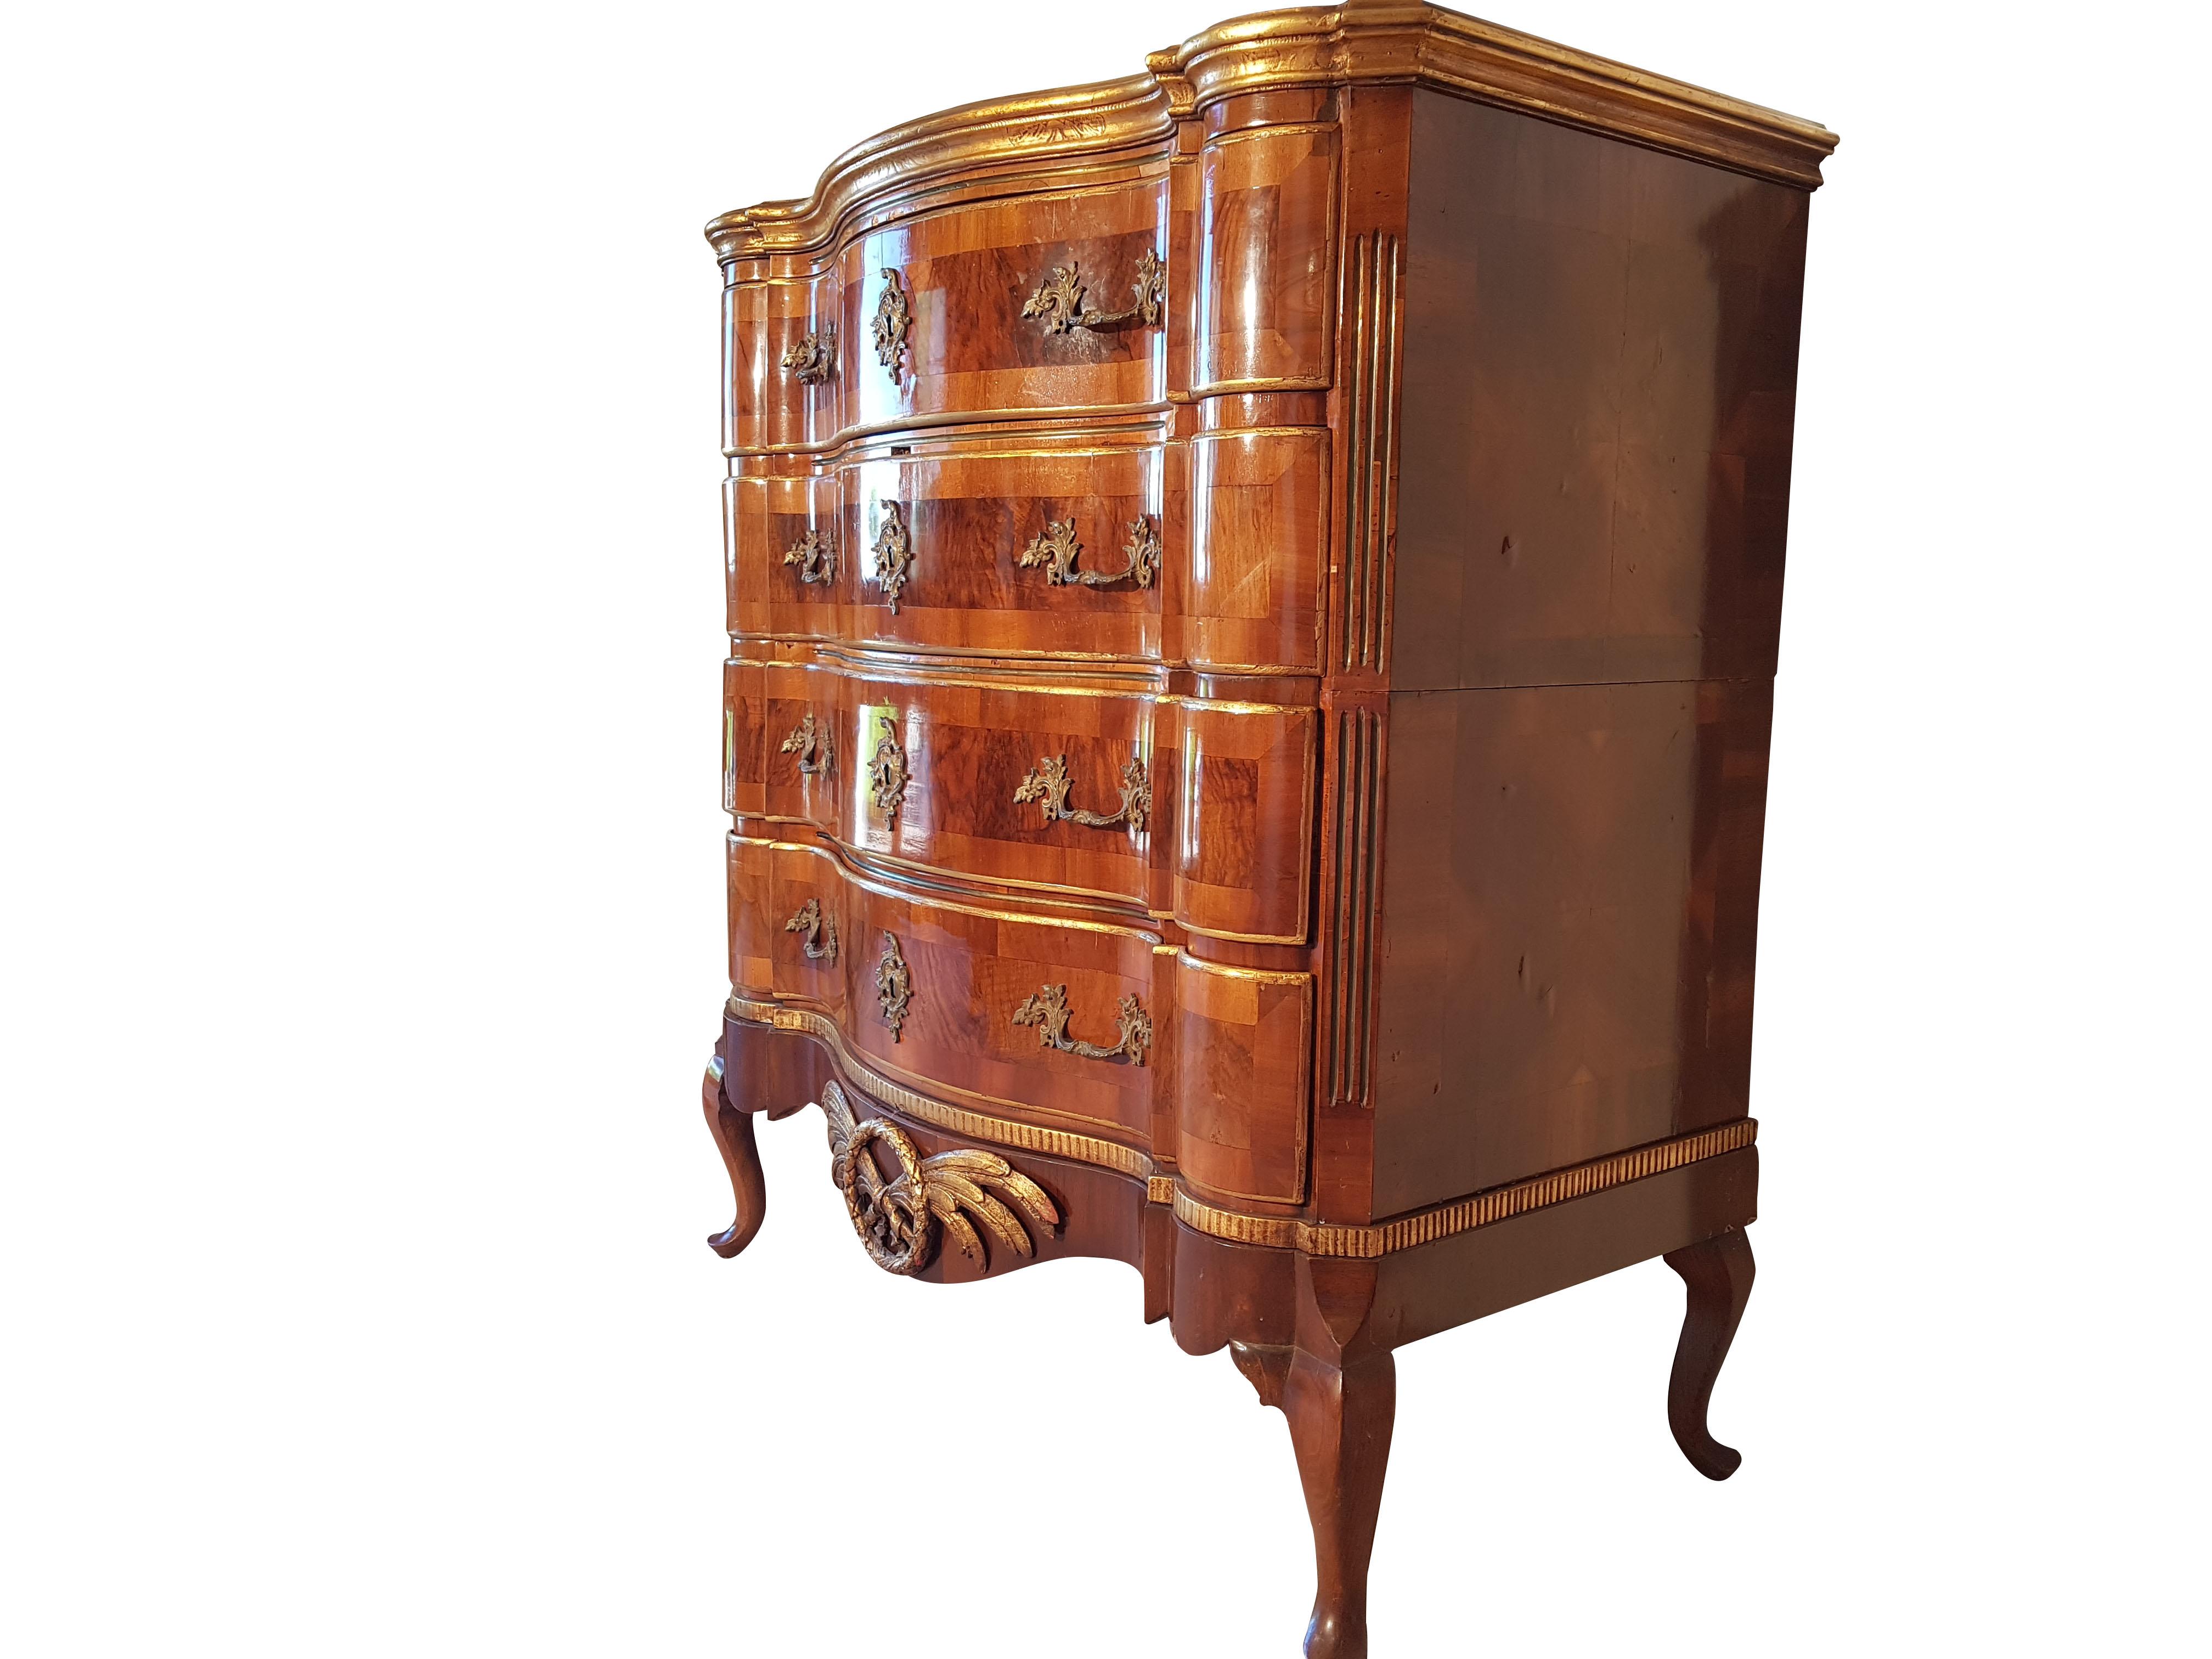 Danish Courtly Rococo Commode from the 18th Century For Sale